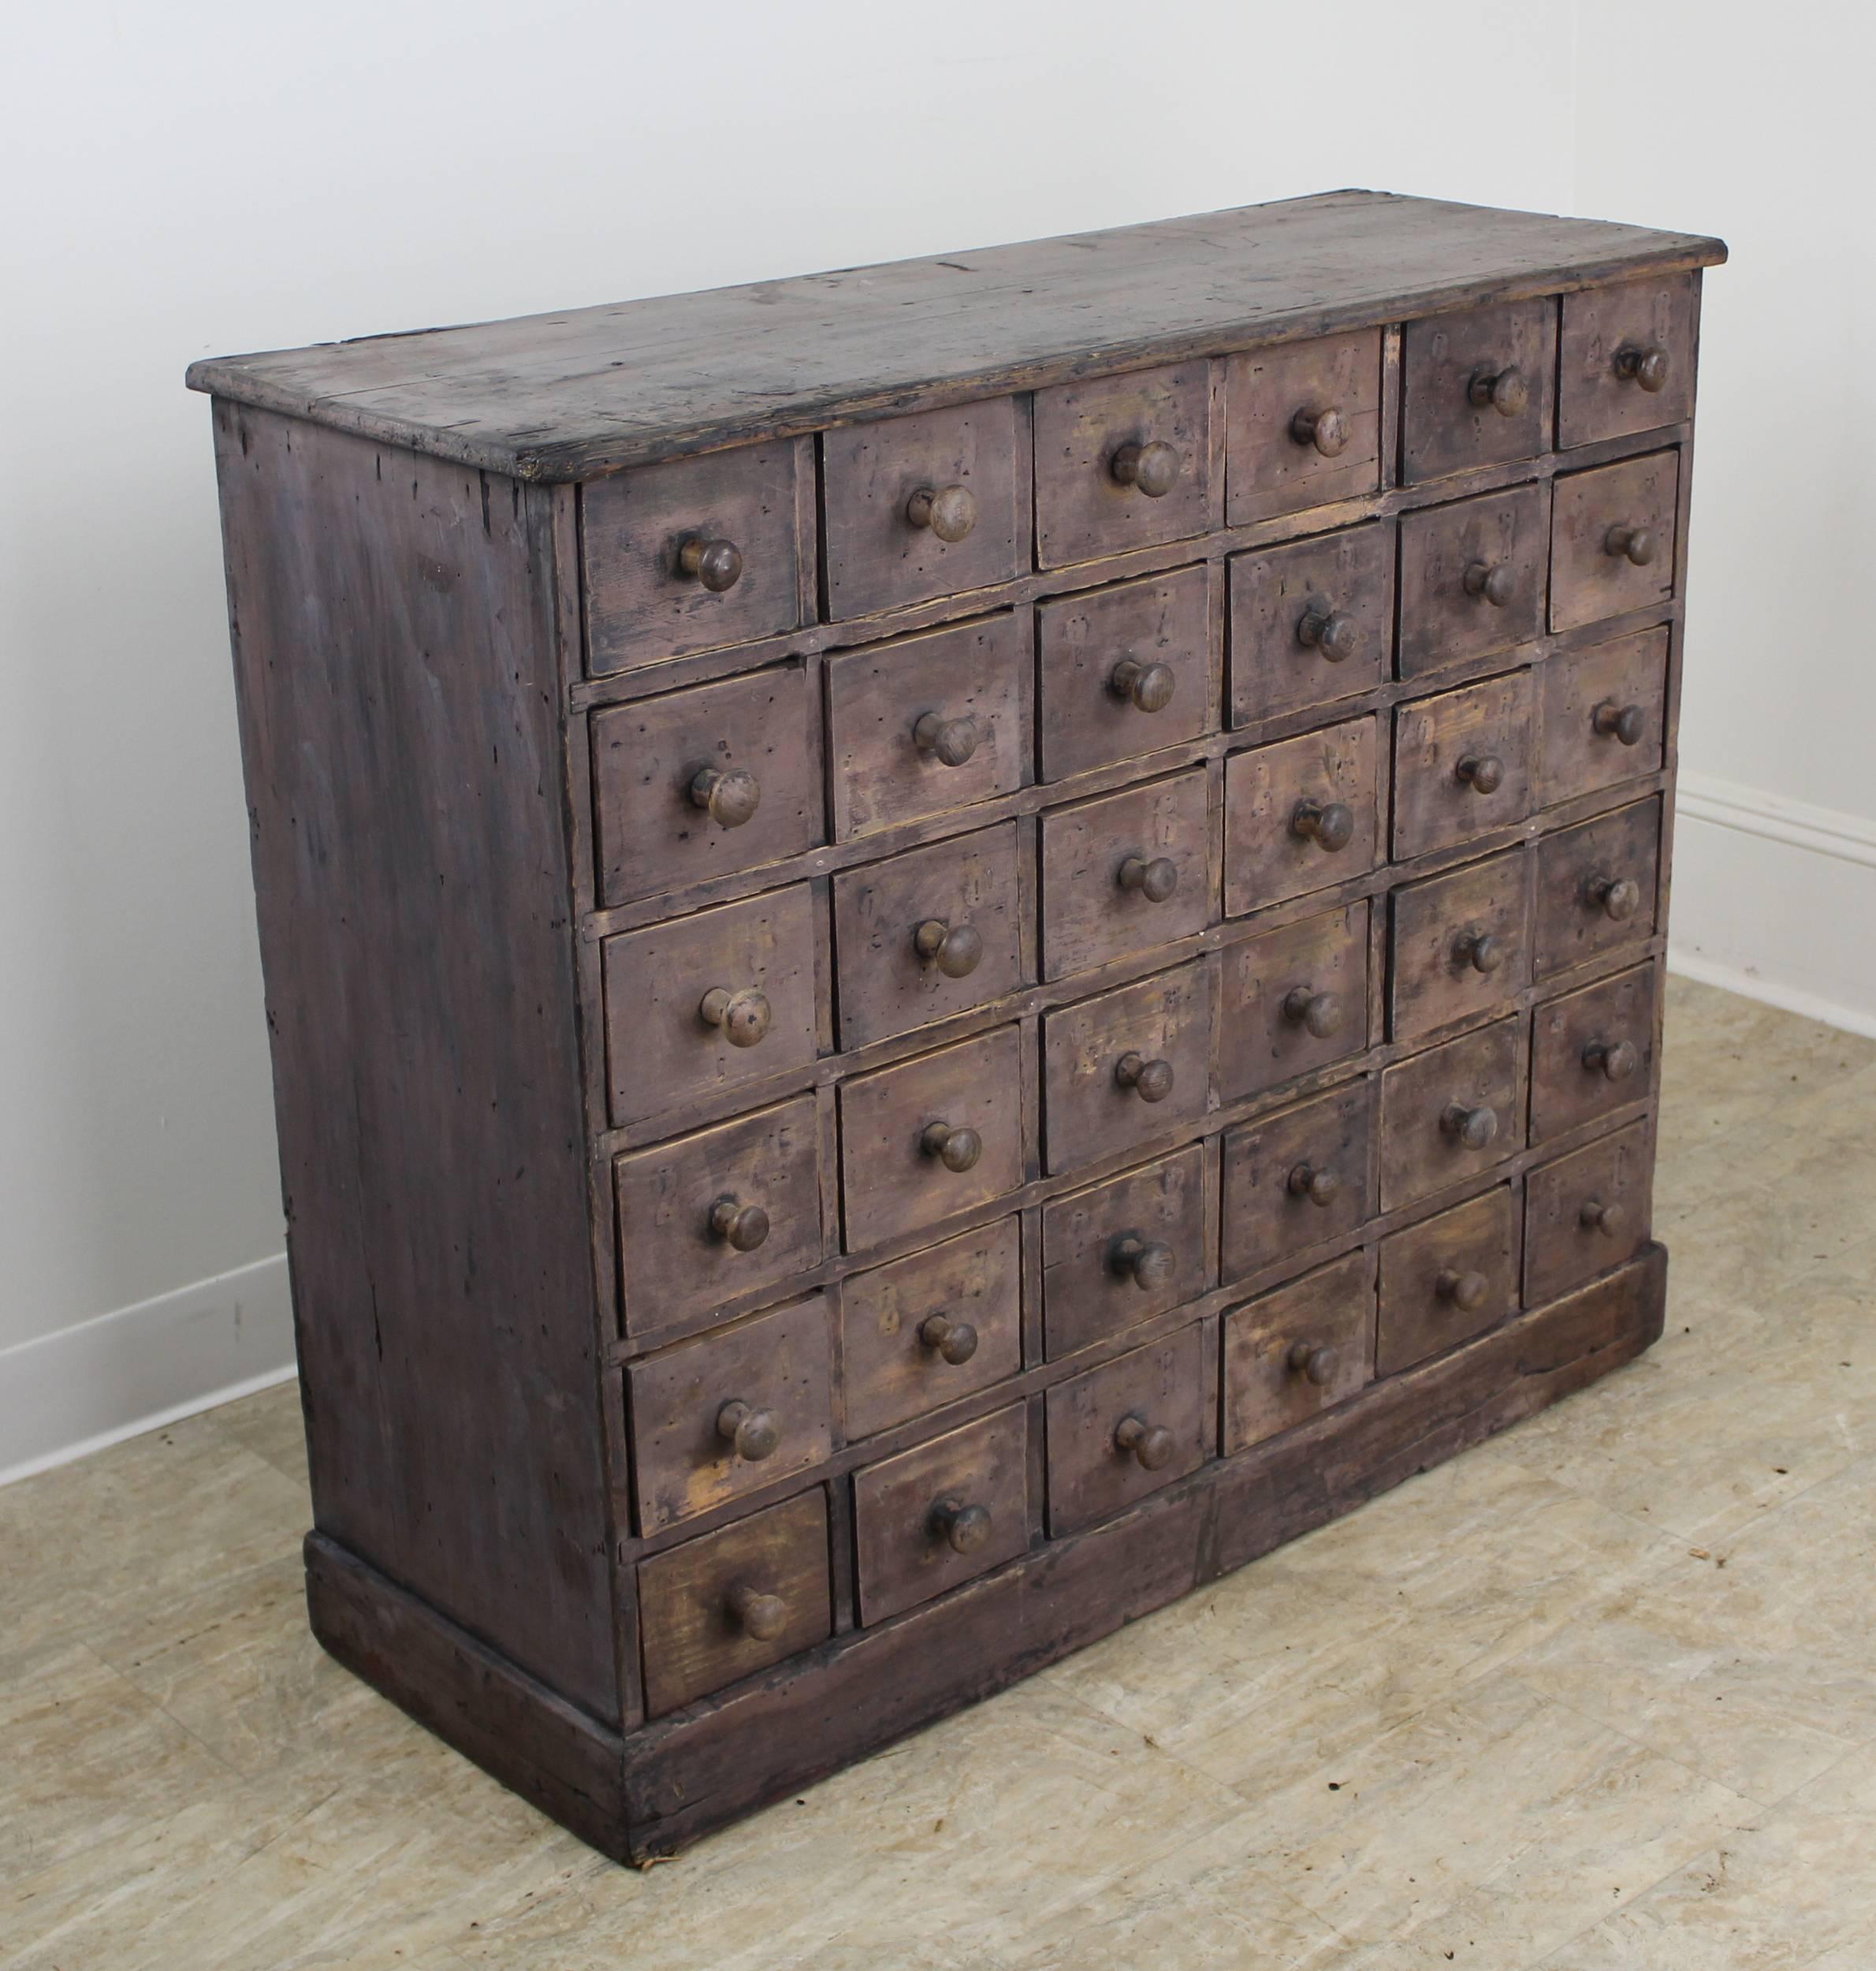 A French apothecary chest with original grey/violet paint and fabulous interesting distress. The drawers are all consistently clean and slide easily. The back of the piece is unfinished A new back can easily be added but the piece is completely